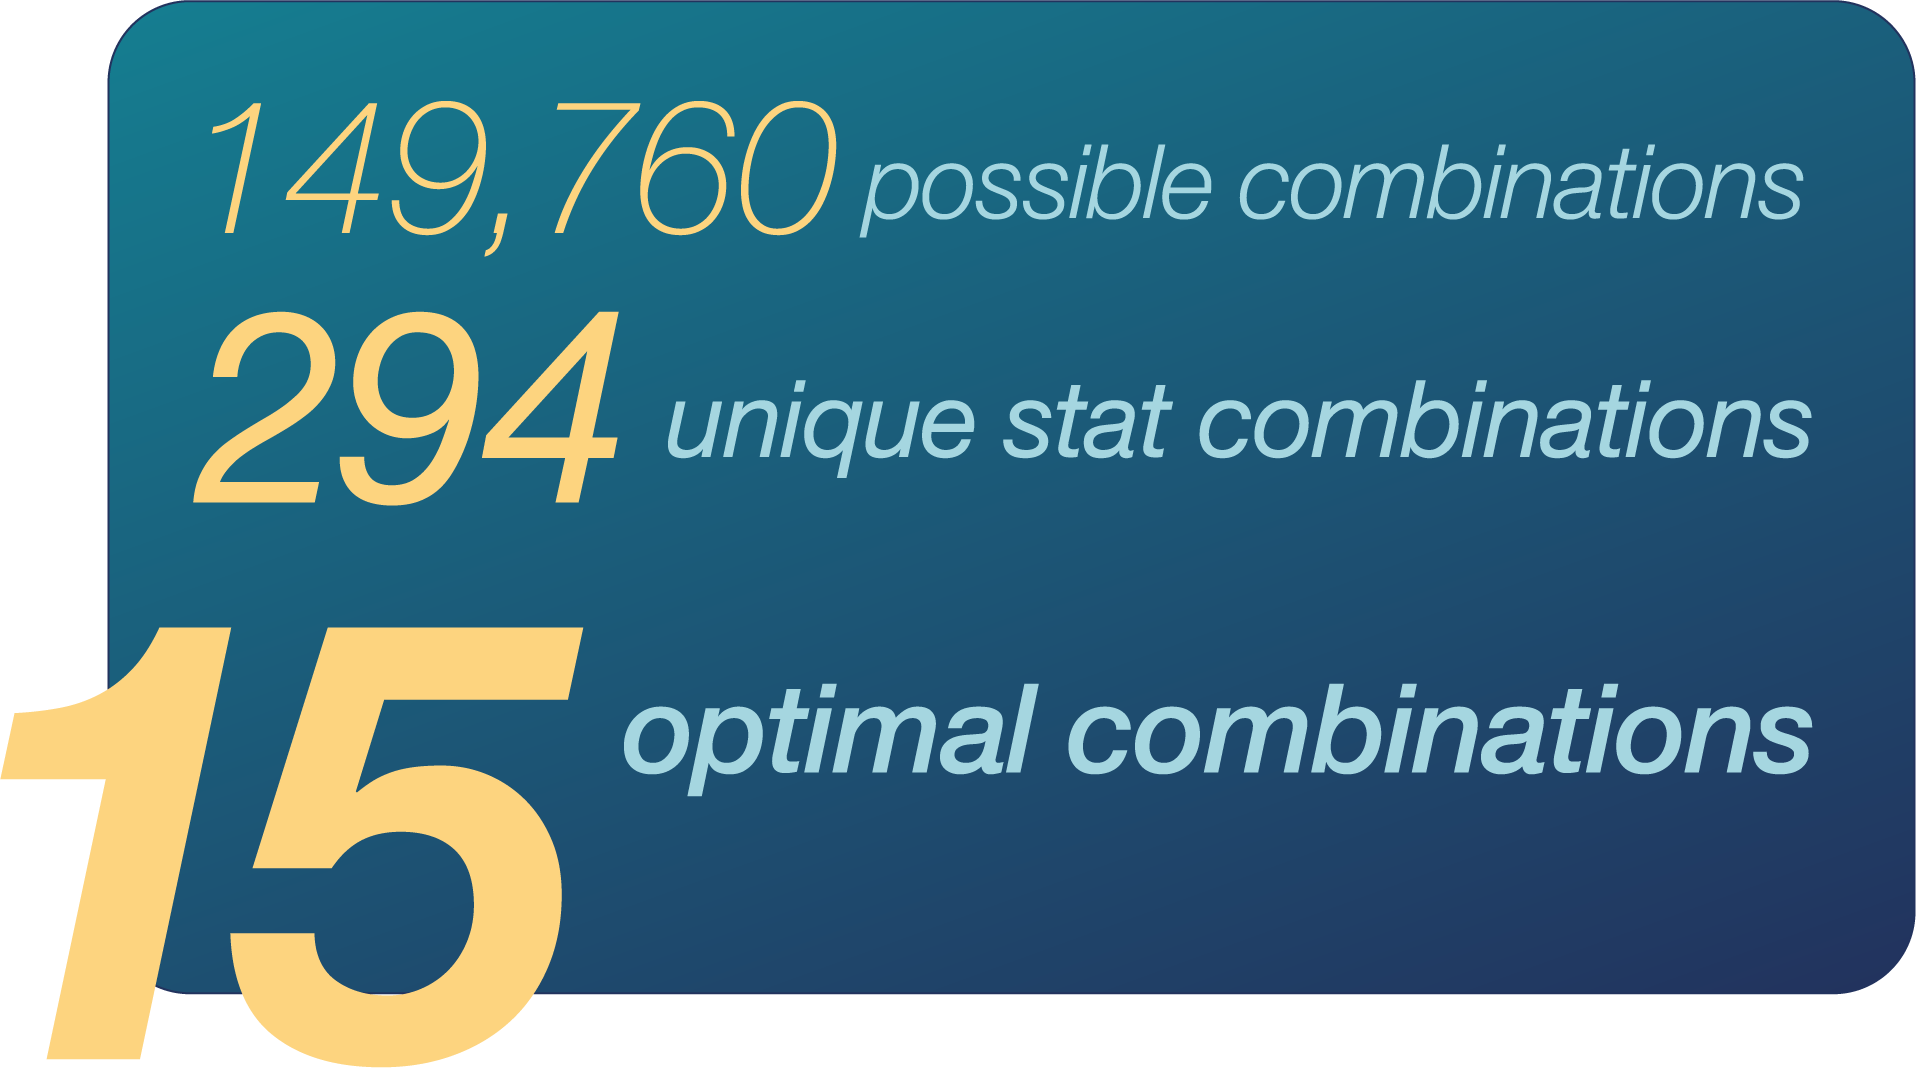 of all the possible combinations (nearly 150,000) there are 15 optimal combinations